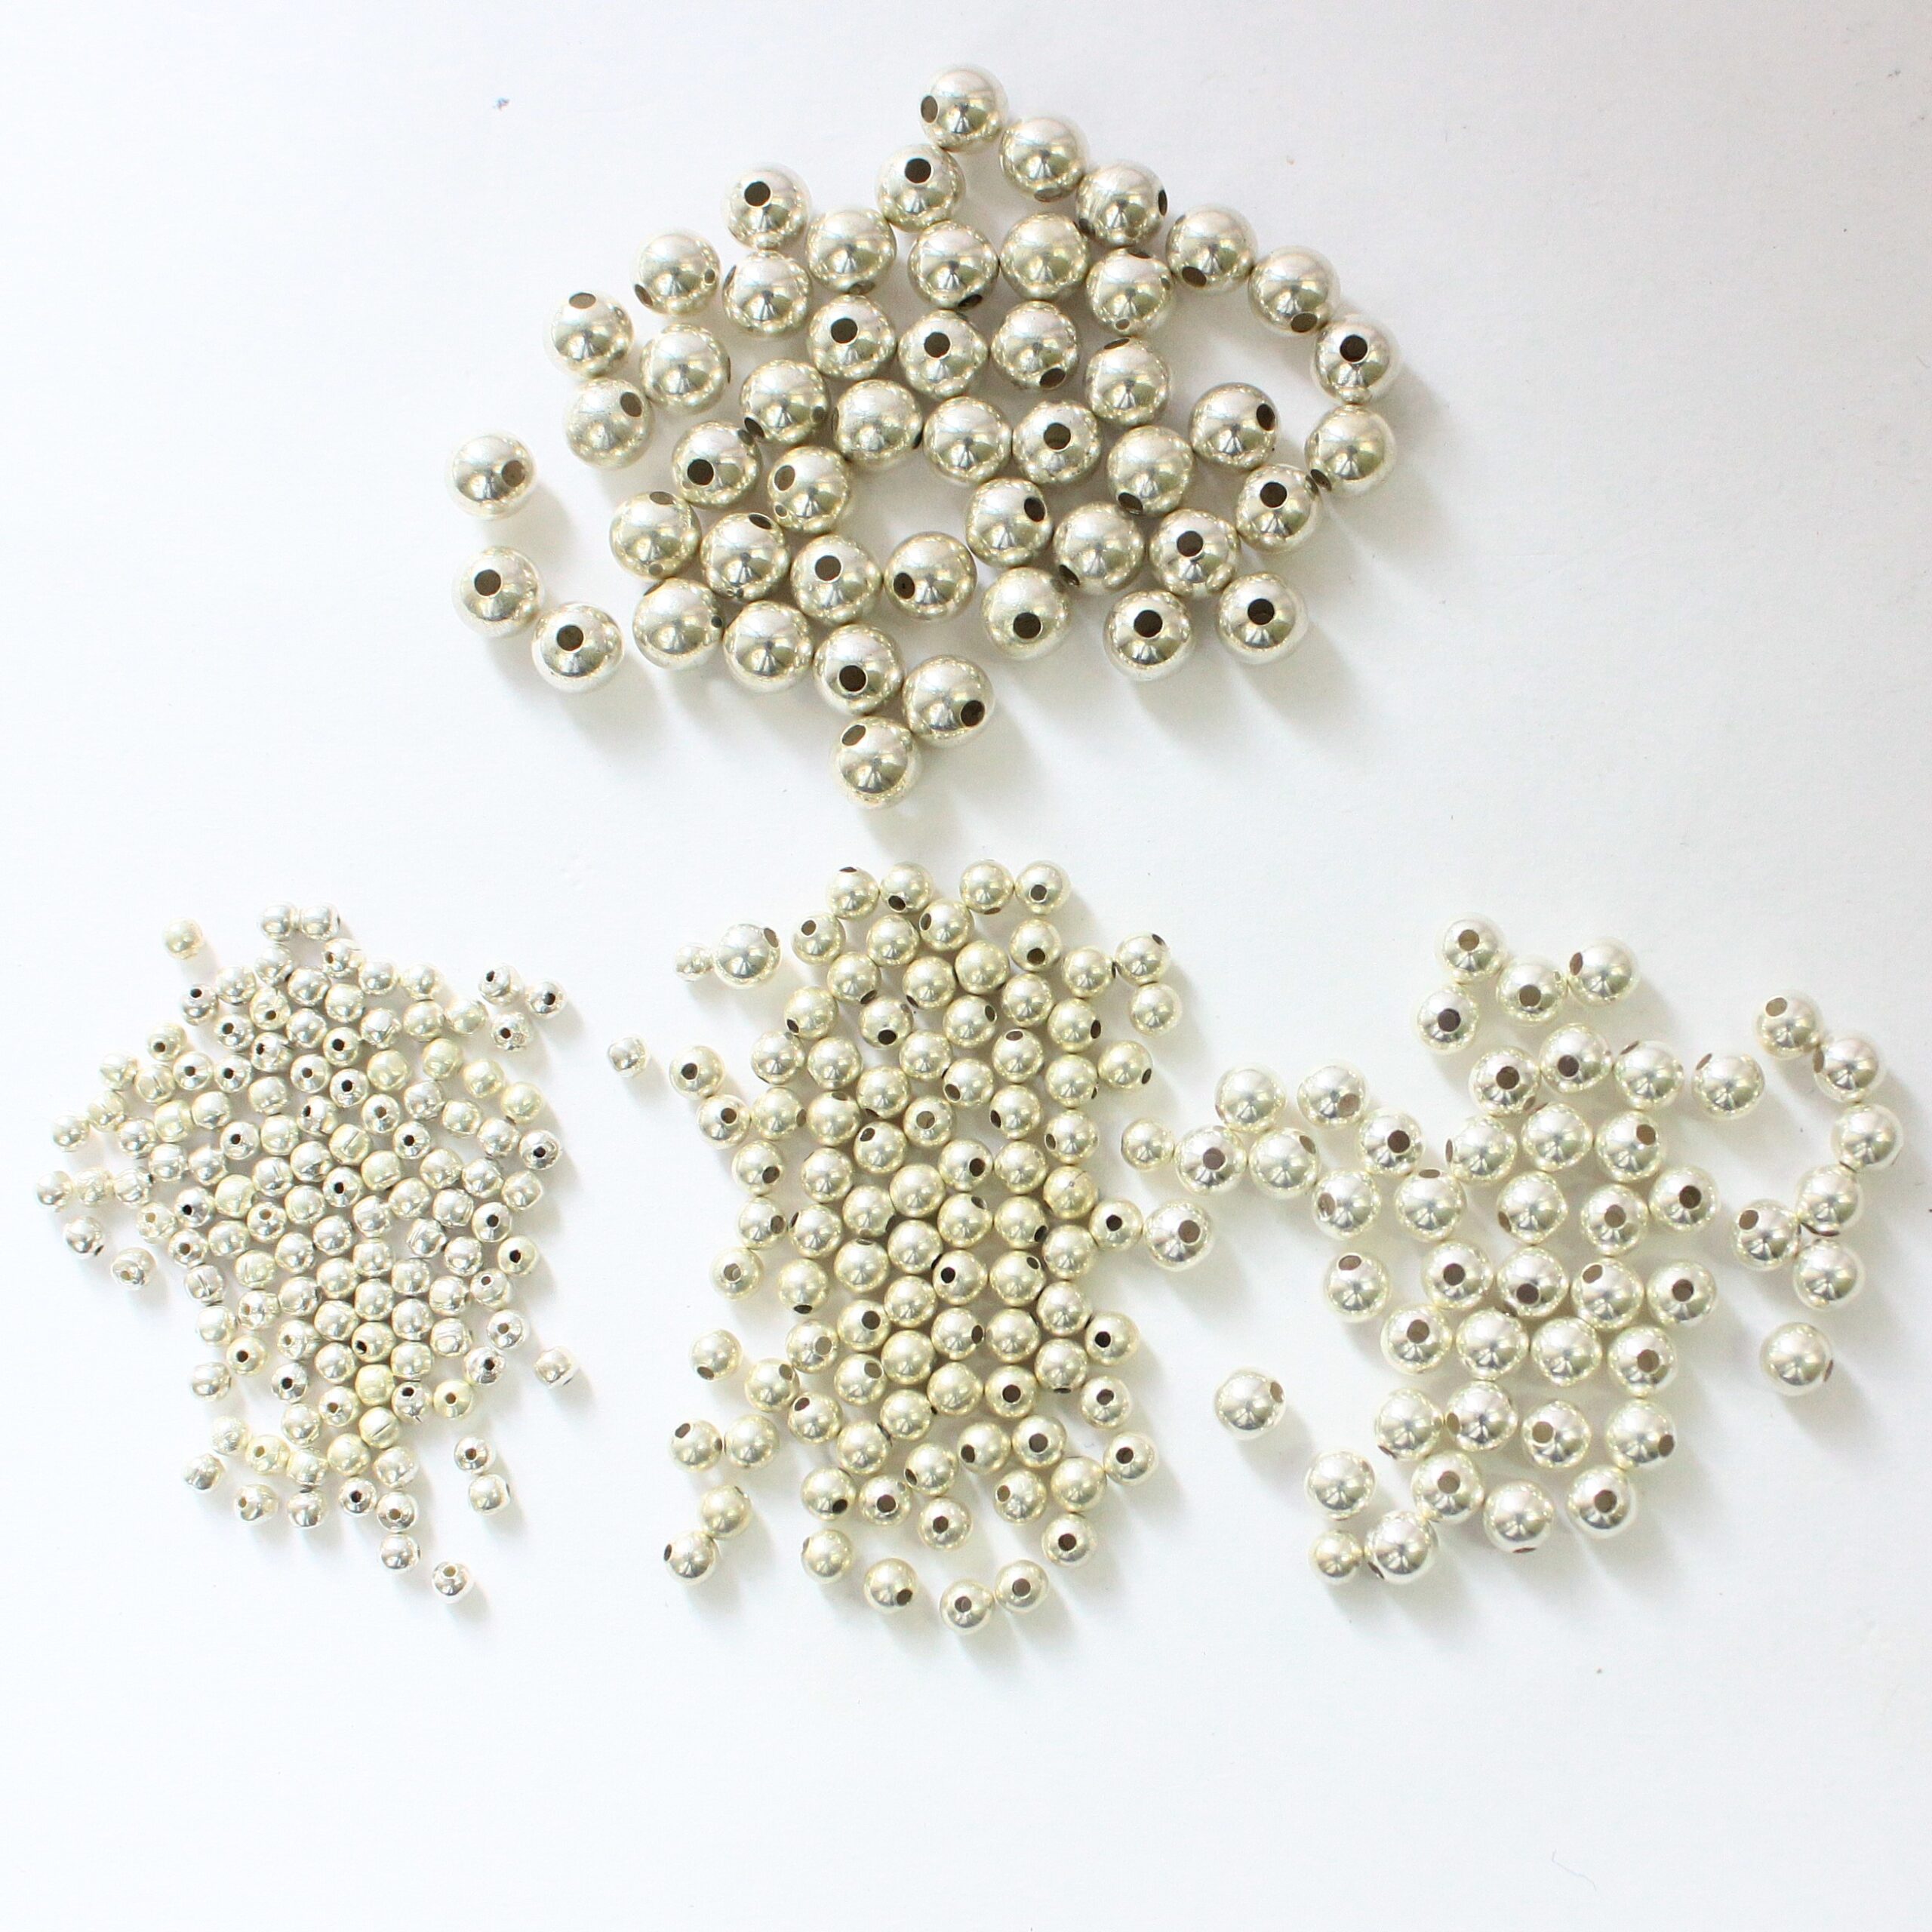 Wholesale 925 Sterling Silver Granulated Spacer Beads 